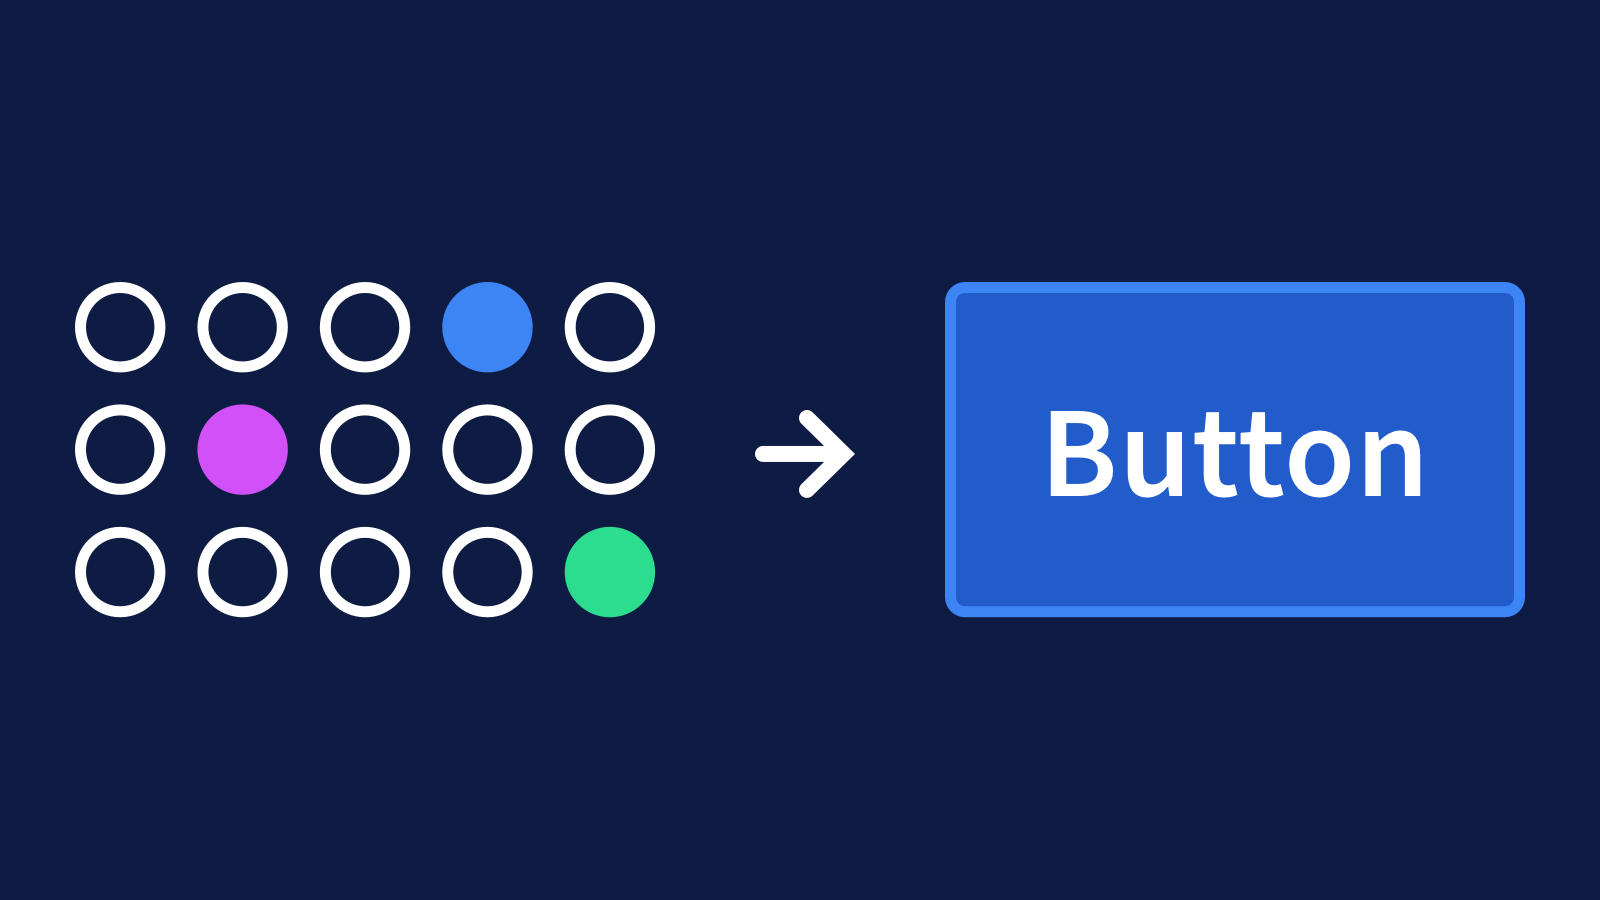 Circles representing design tokens combine to form a button component.